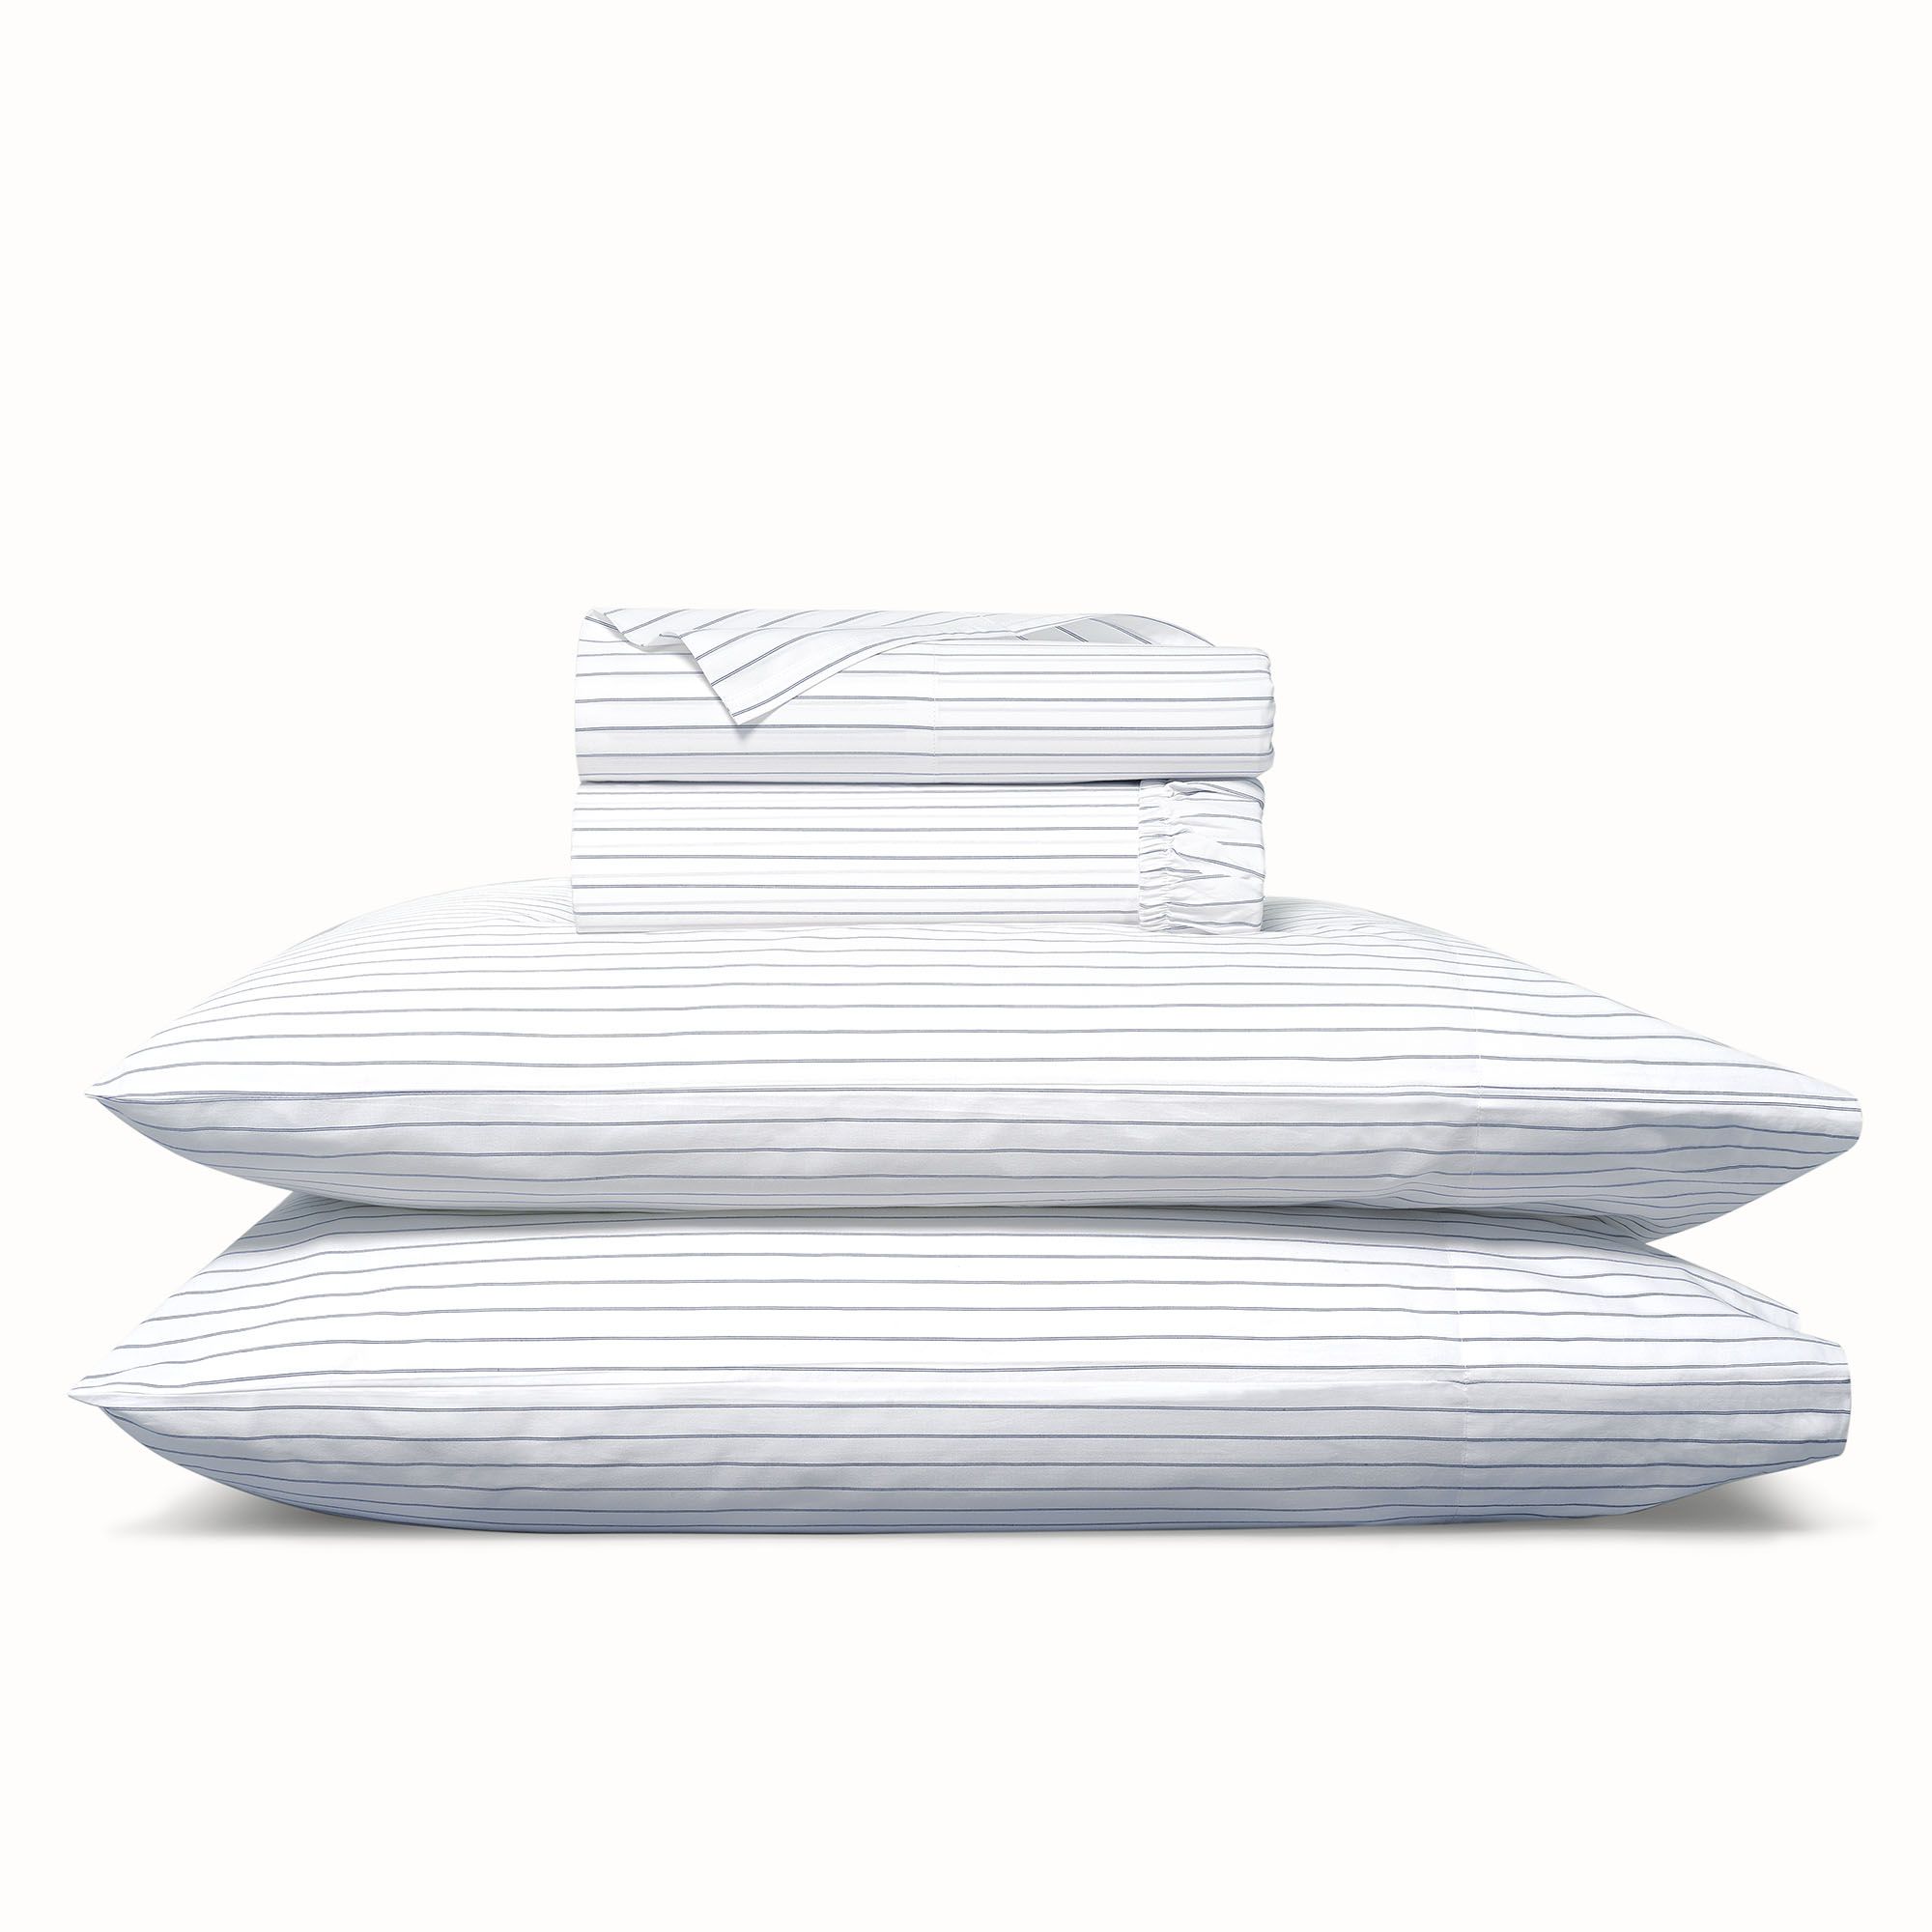 Striped Percale Bed Sheet Set - Organic Cotton - Boll & Branch | Boll & Branch